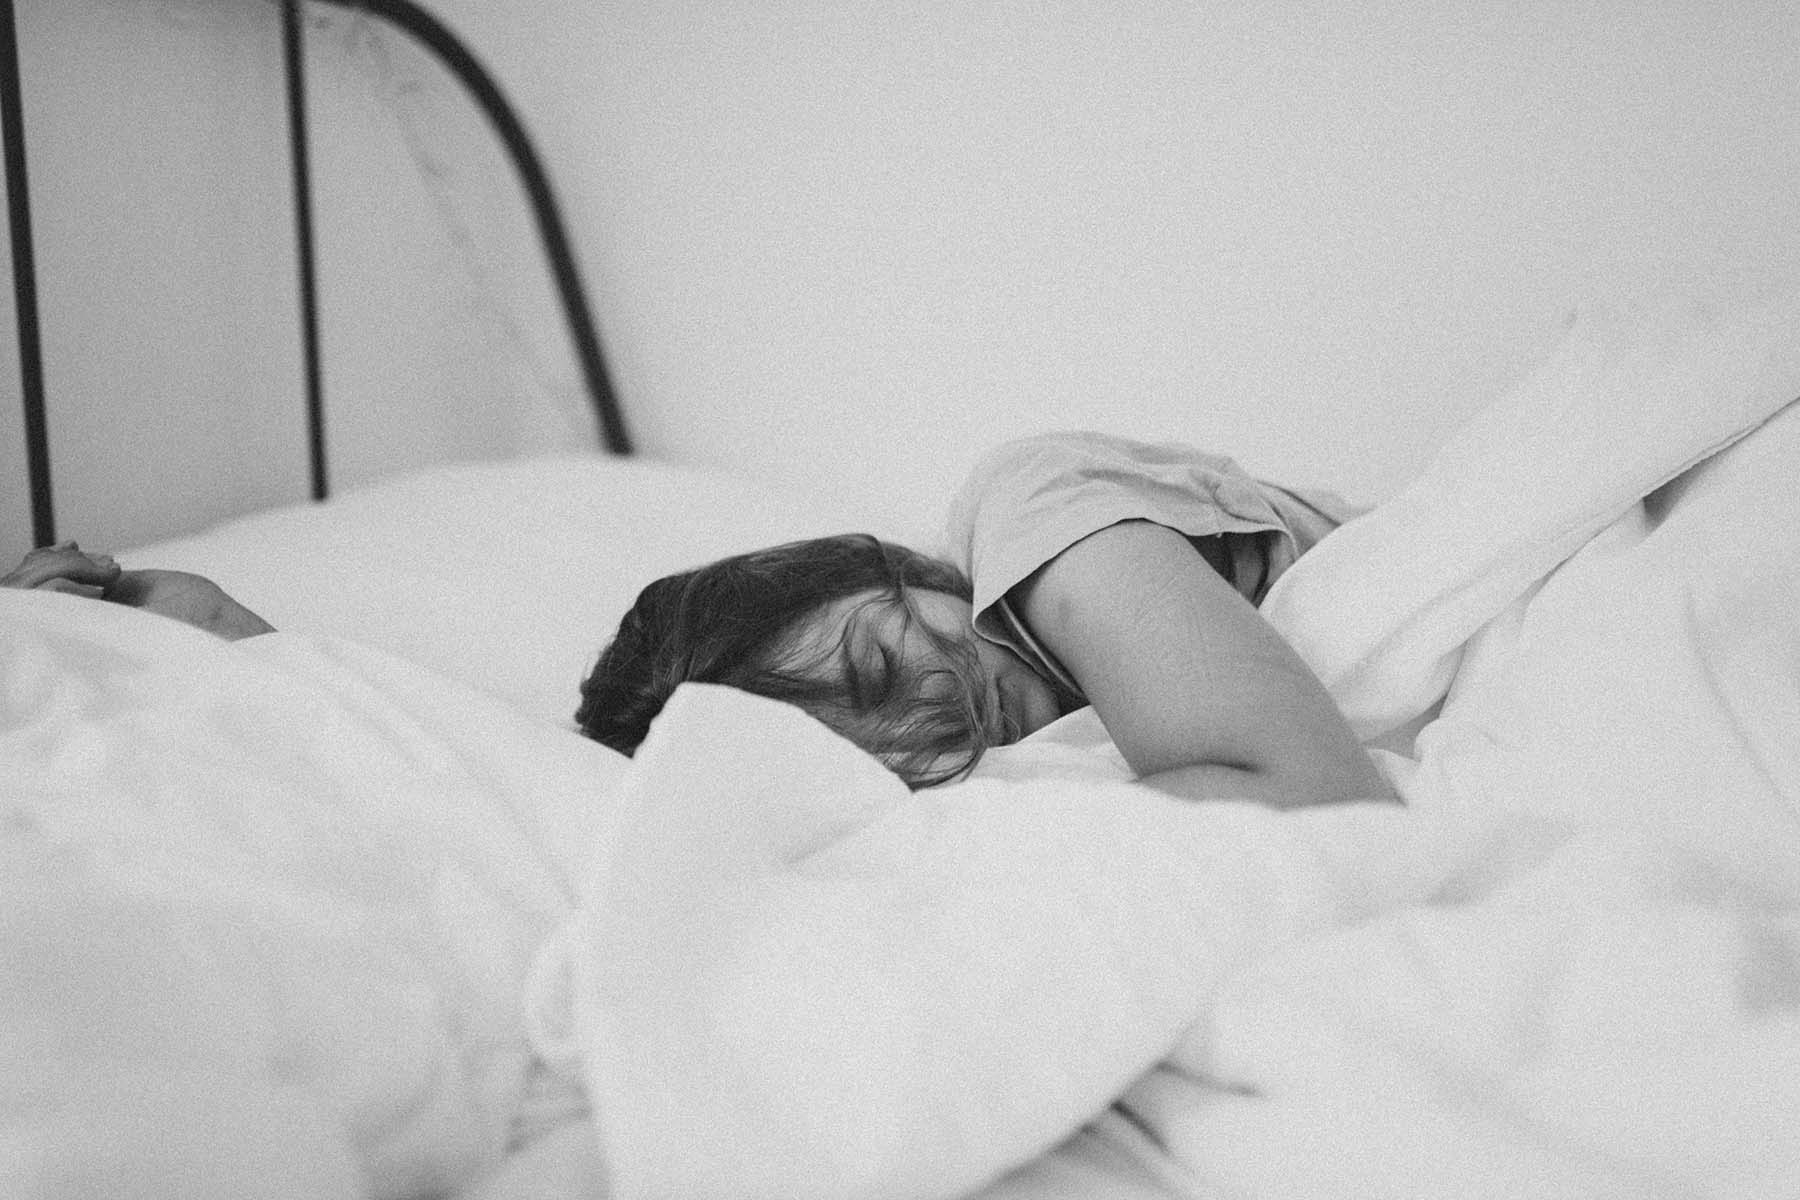 Can CBD and CBN overcome insomnia and provide deeper sleep?